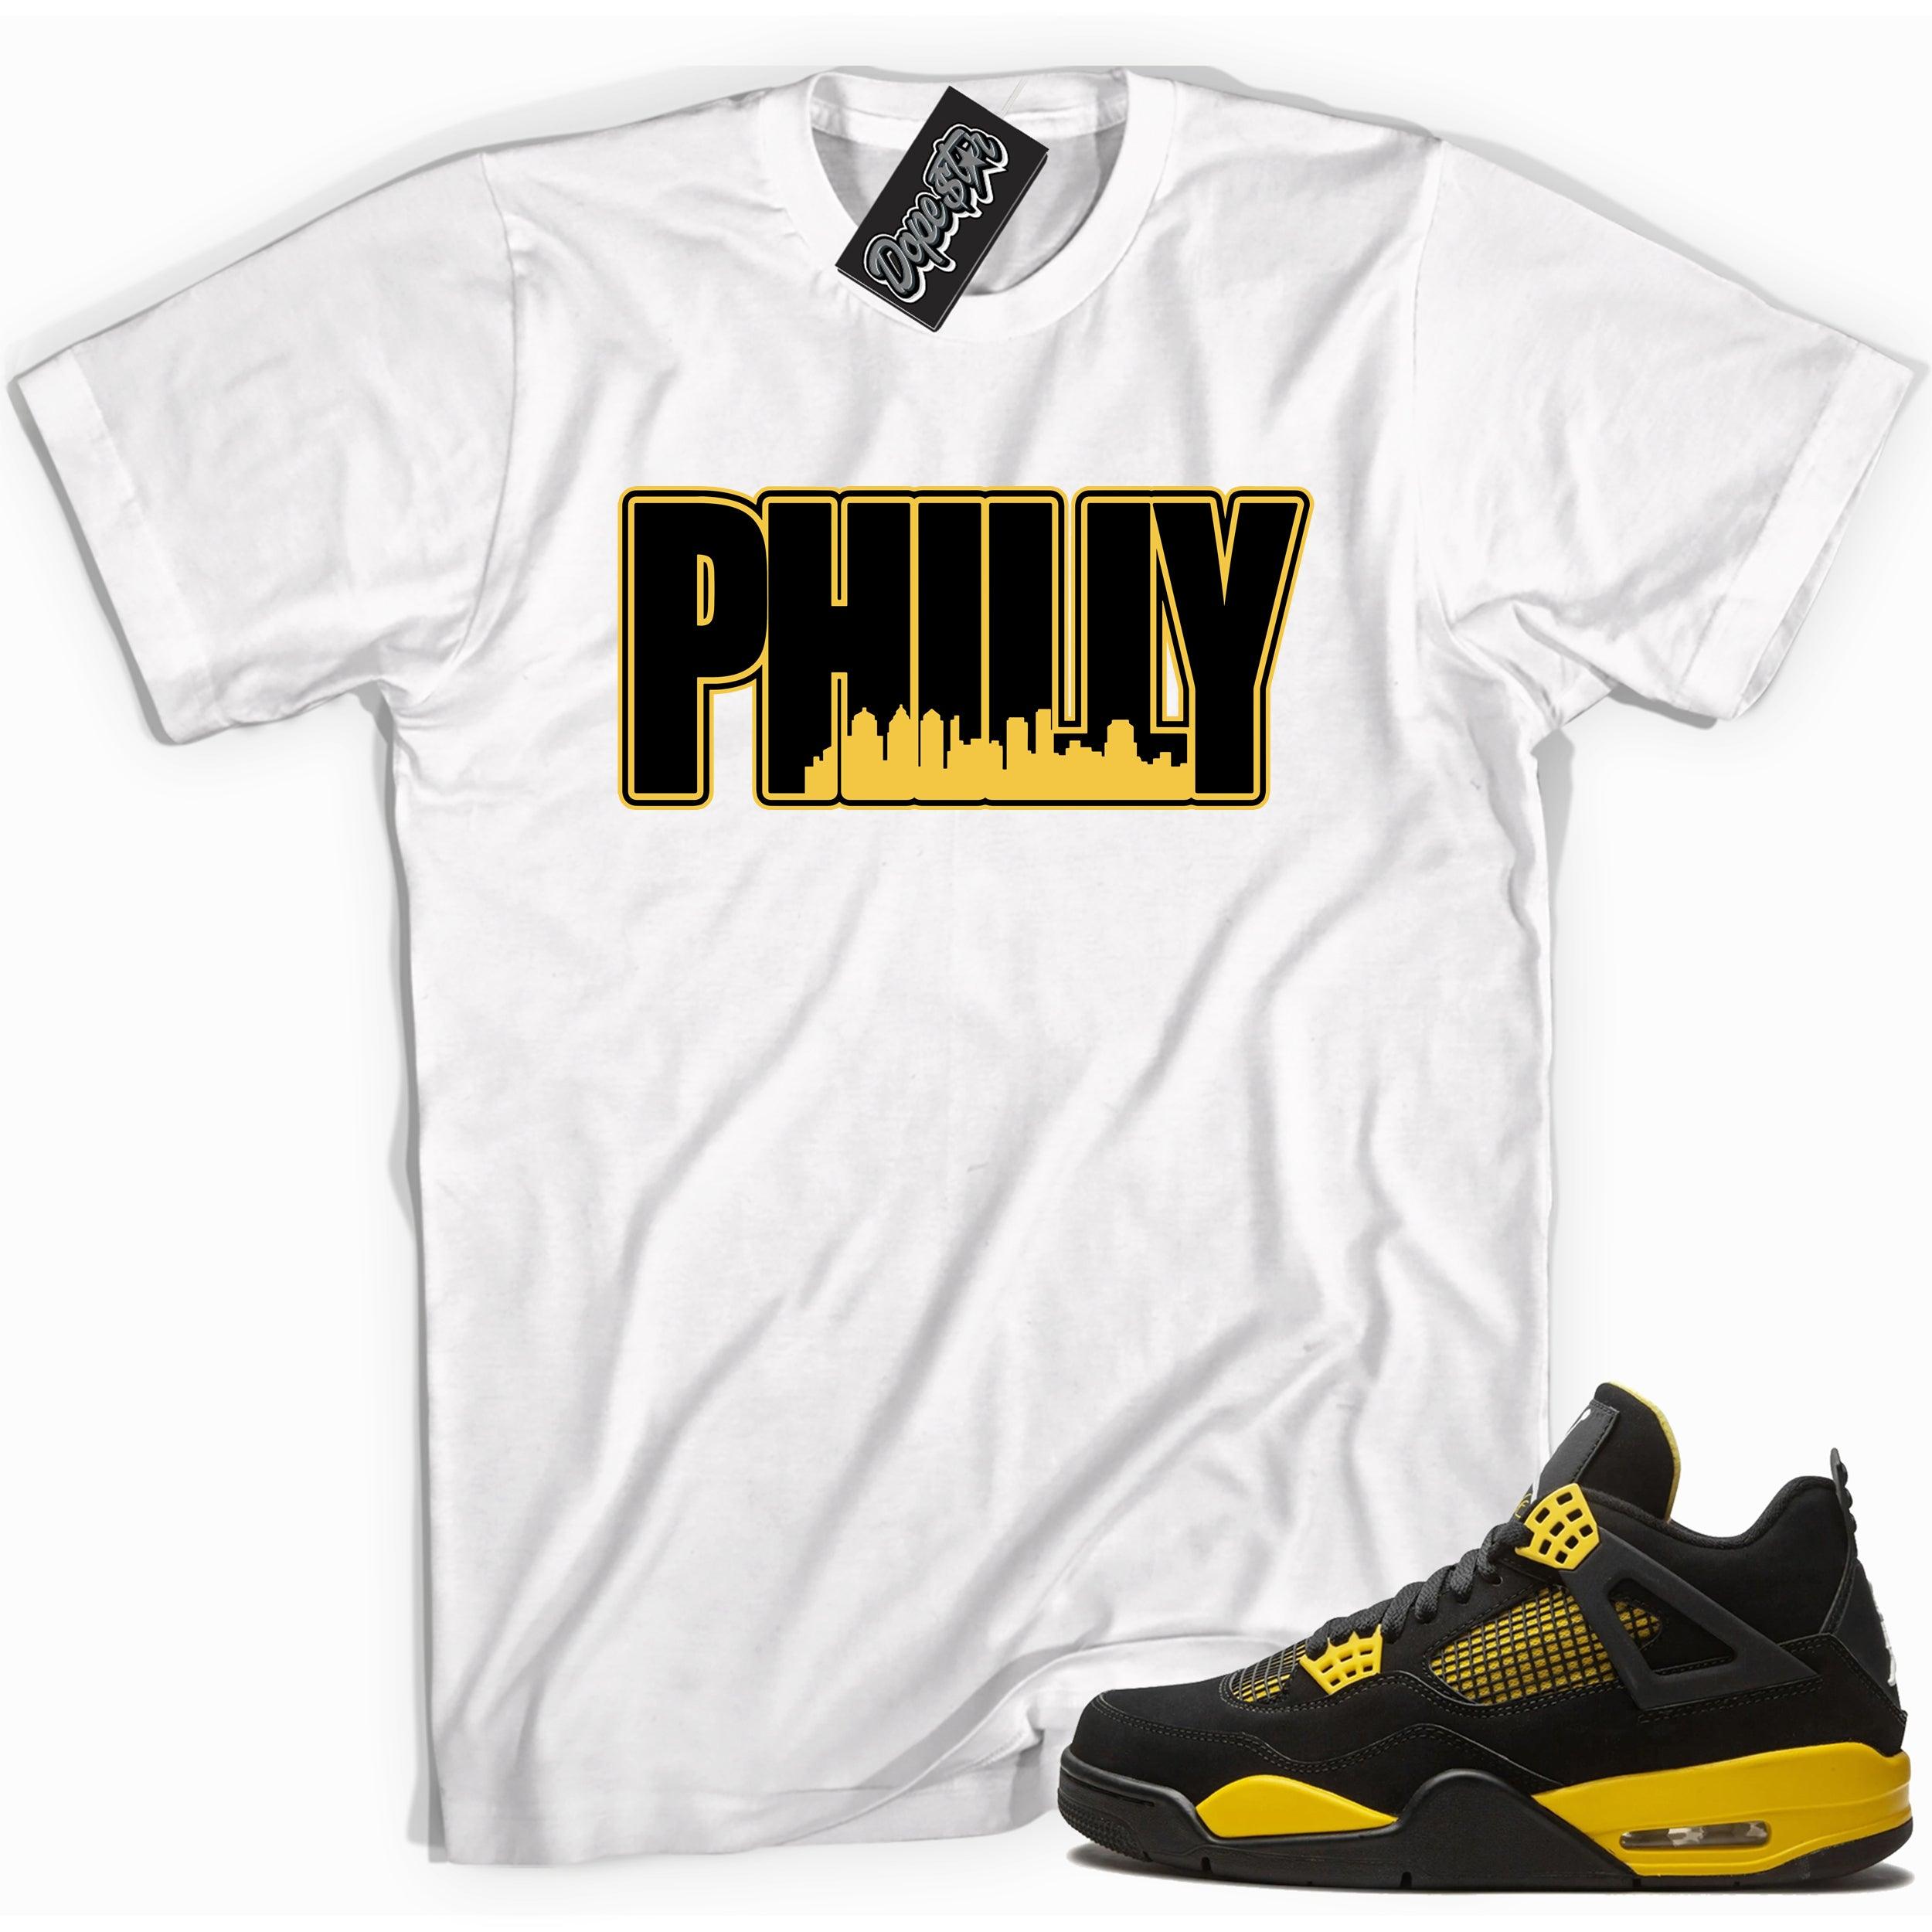 Cool white  graphic tee with 'philly' print, that perfectly matches Air Jordan 4 Thunder sneakers